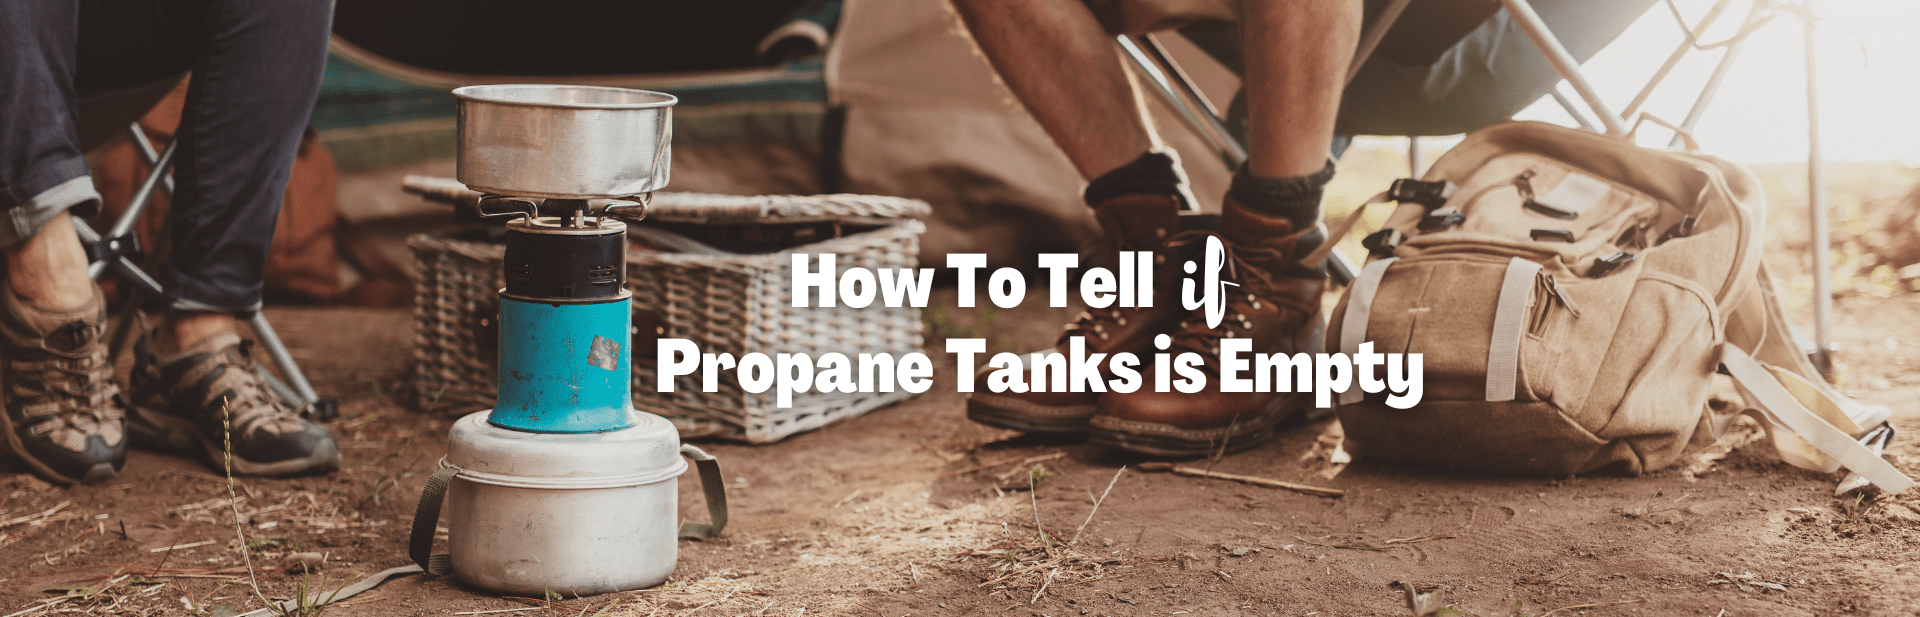 No Propane, No Gain: How to Tell if a Propane Tank Is Empty